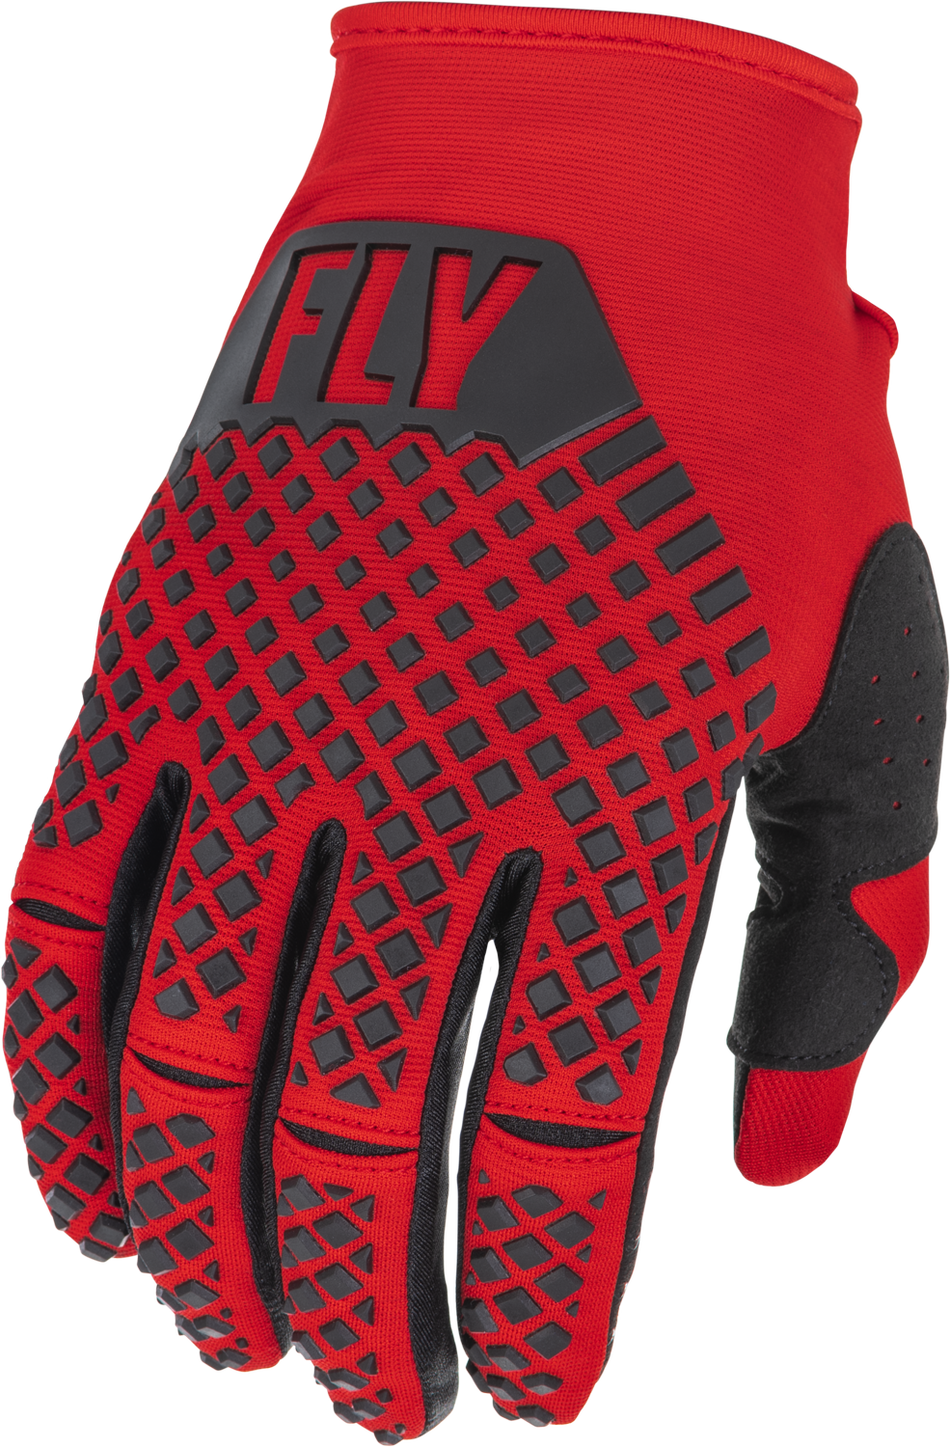 FLY RACING Kinetic Gloves Red/Black Xl 375-413X